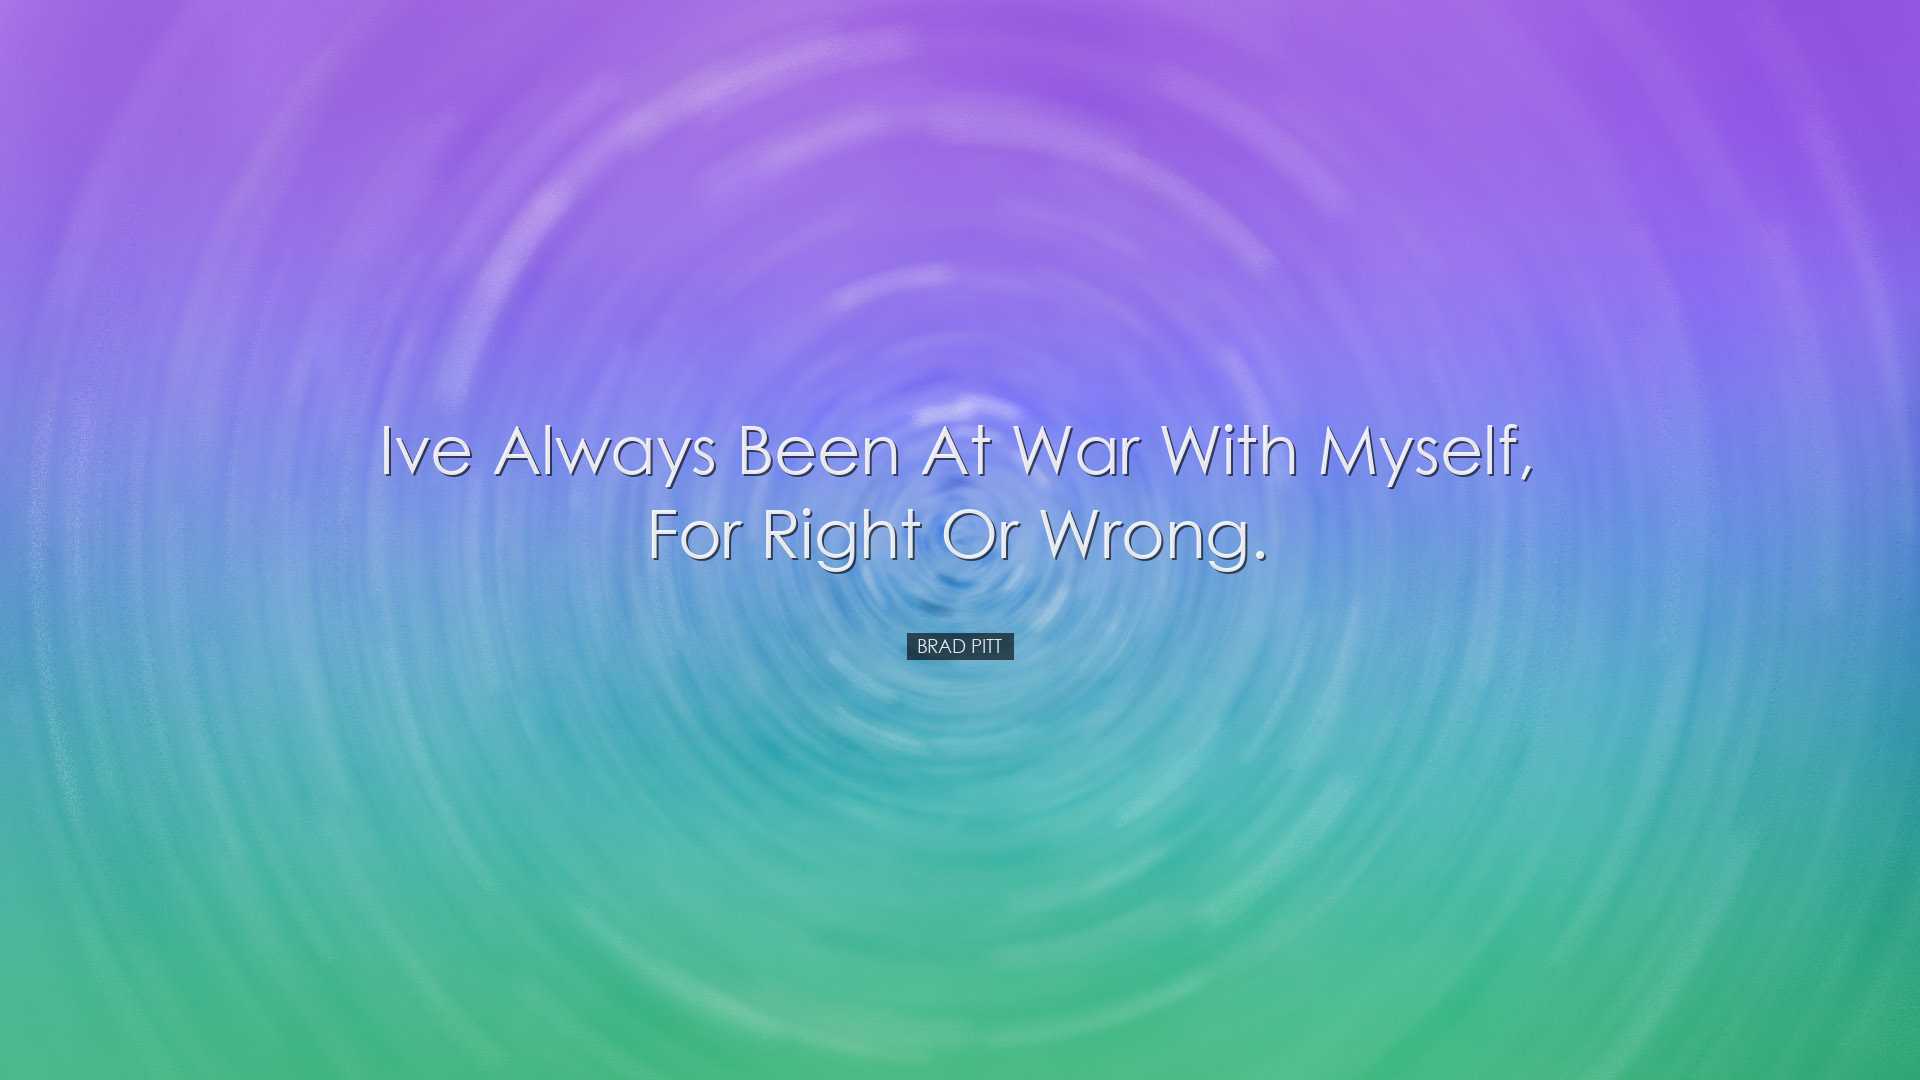 Ive always been at war with myself, for right or wrong. - Brad Pit